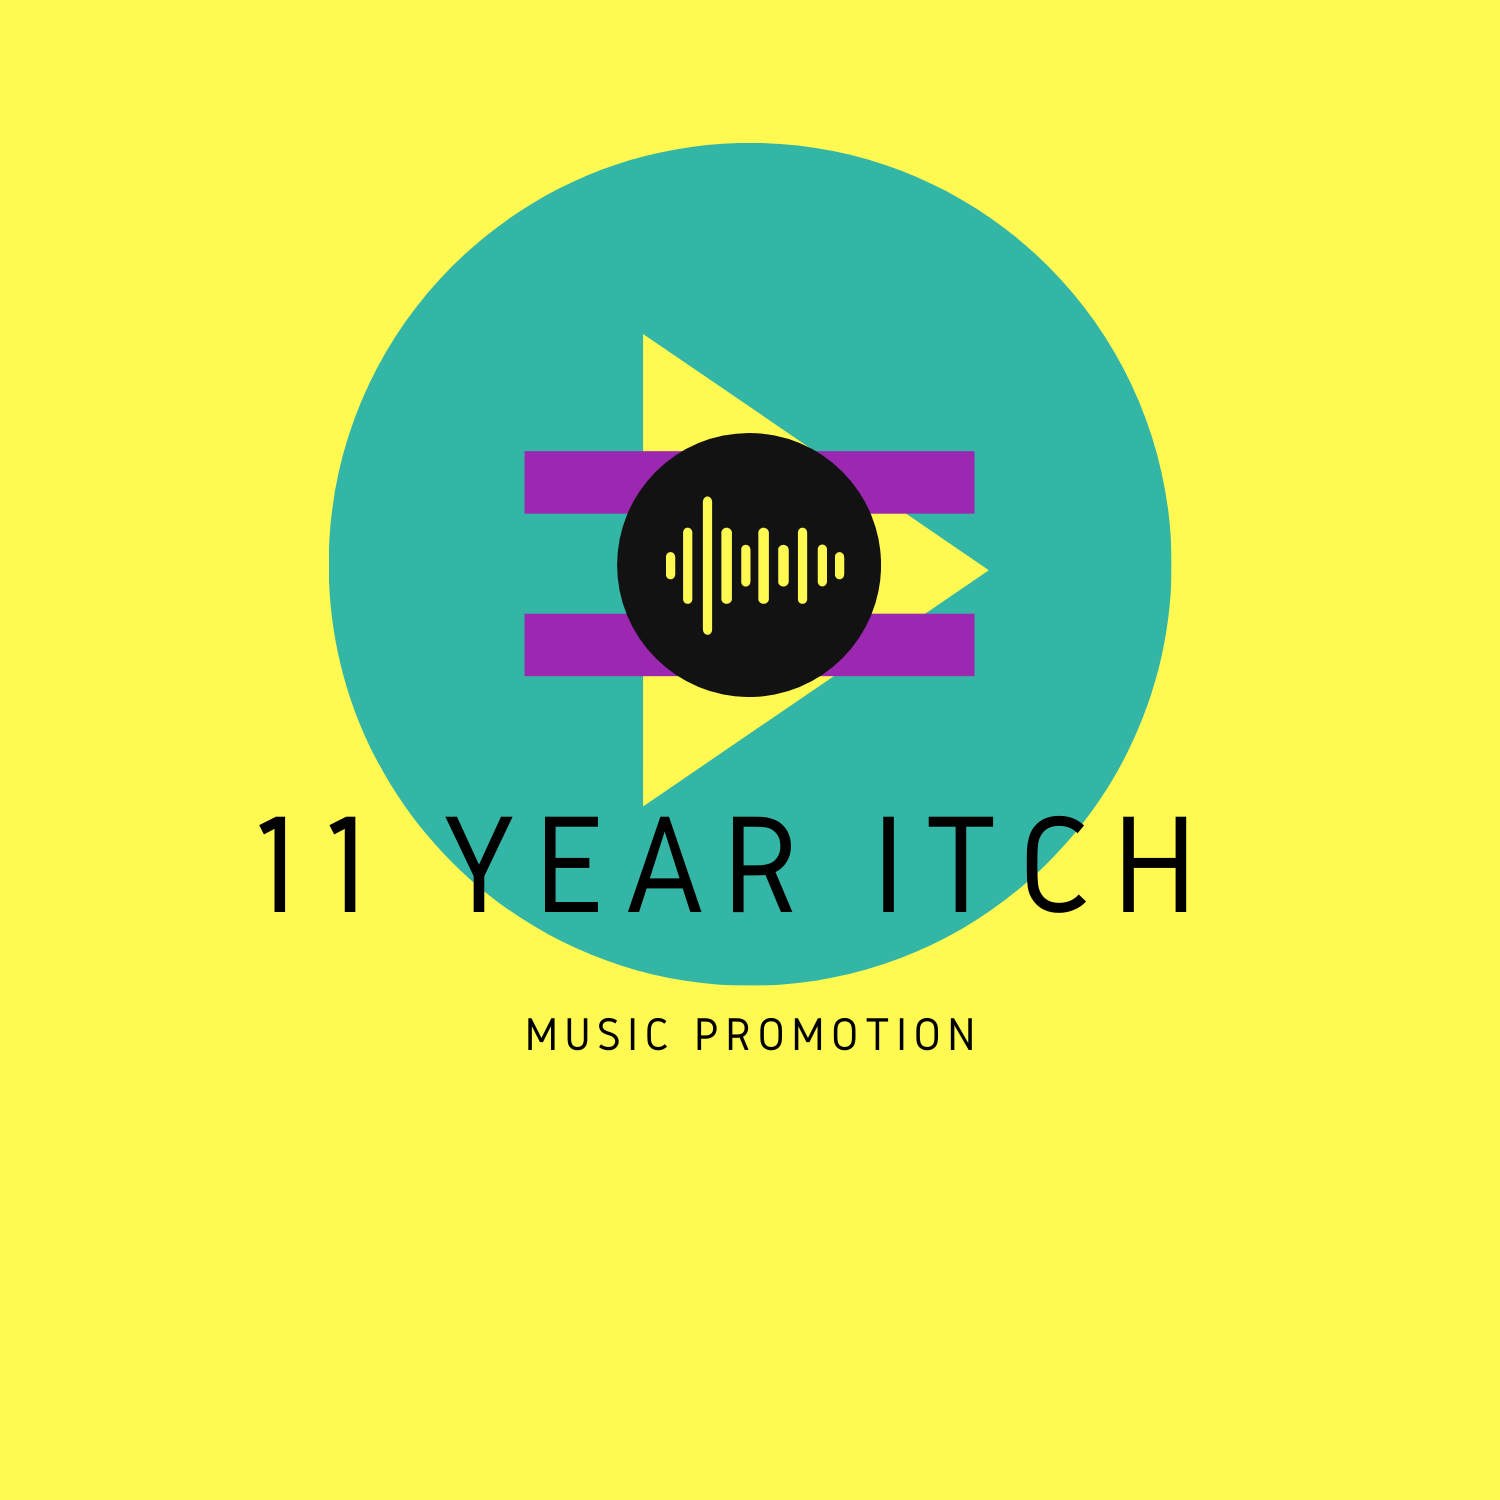 11 Year Itch